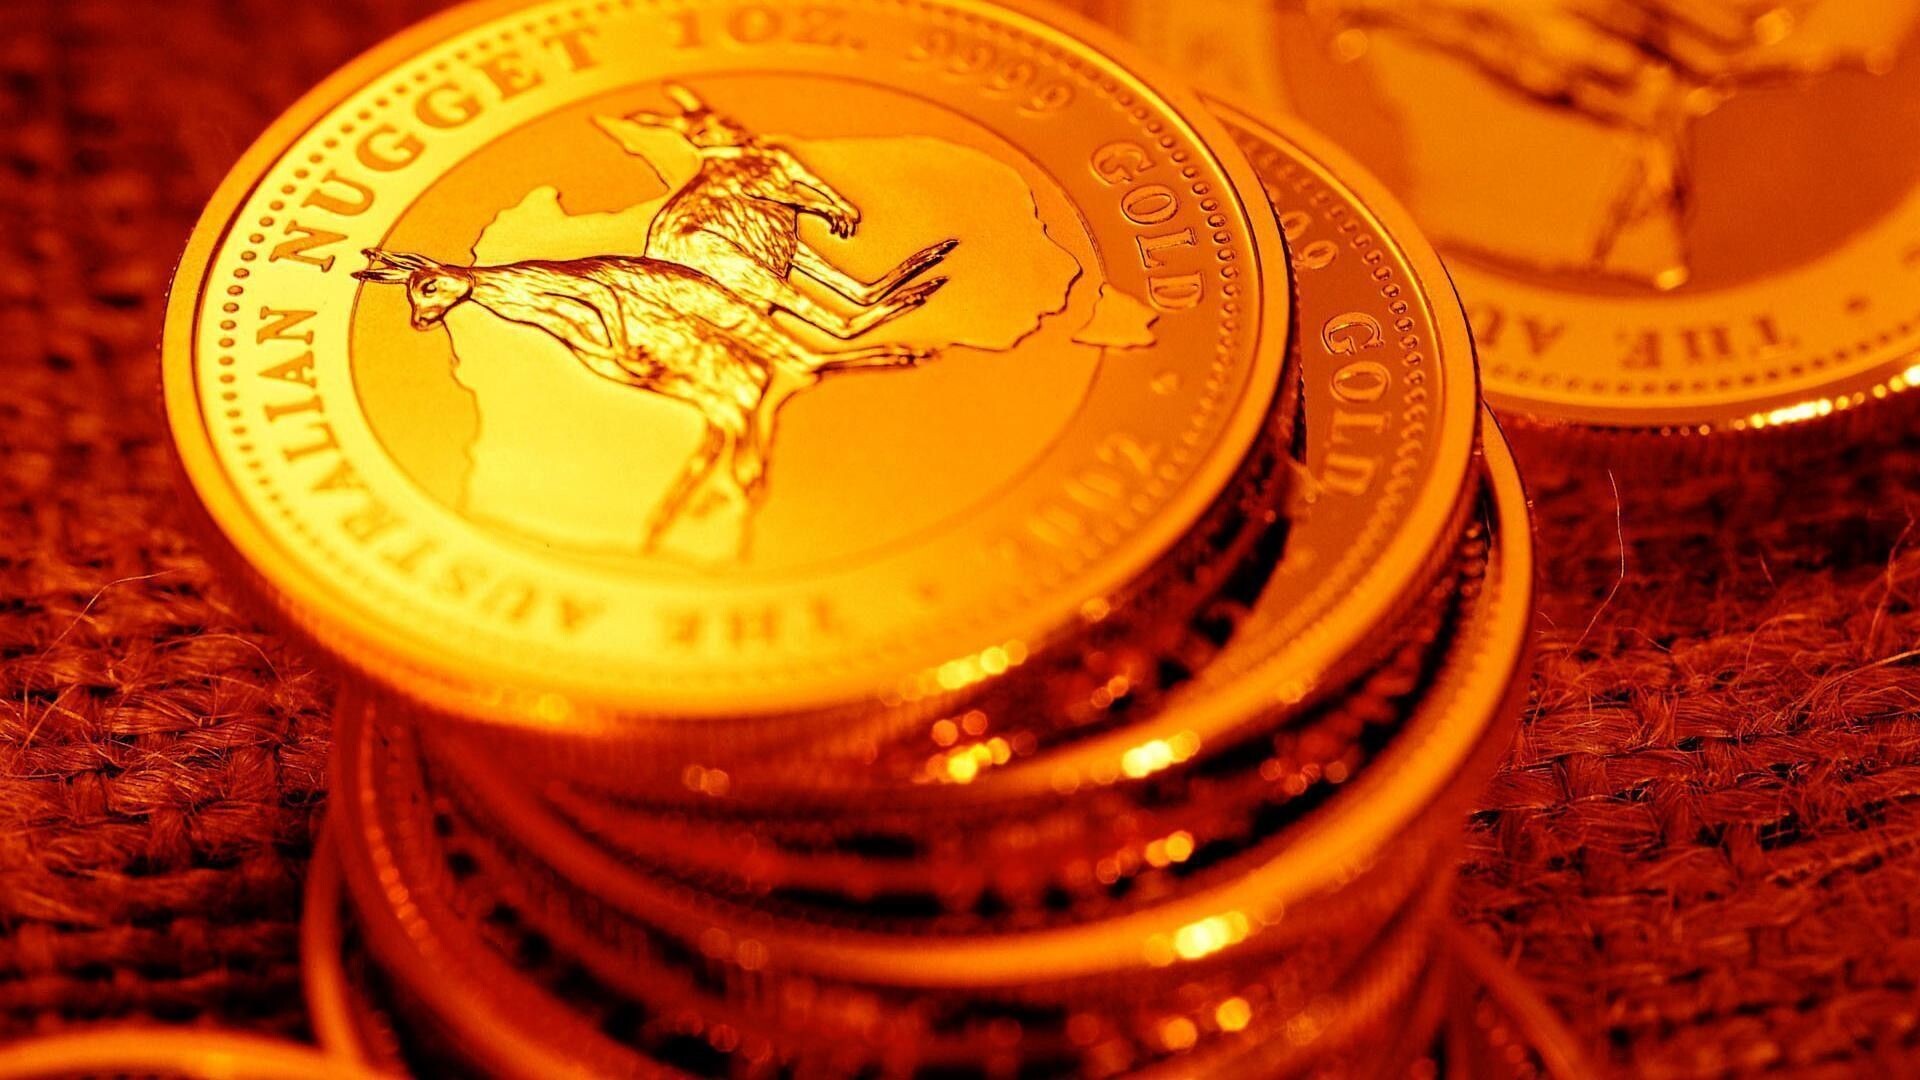 Gold Coins: 10 oz. Australian Gold Nugget (Kangaroo) Bullion Coin, The reverse of the coin, The classic artistry. 1920x1080 Full HD Background.